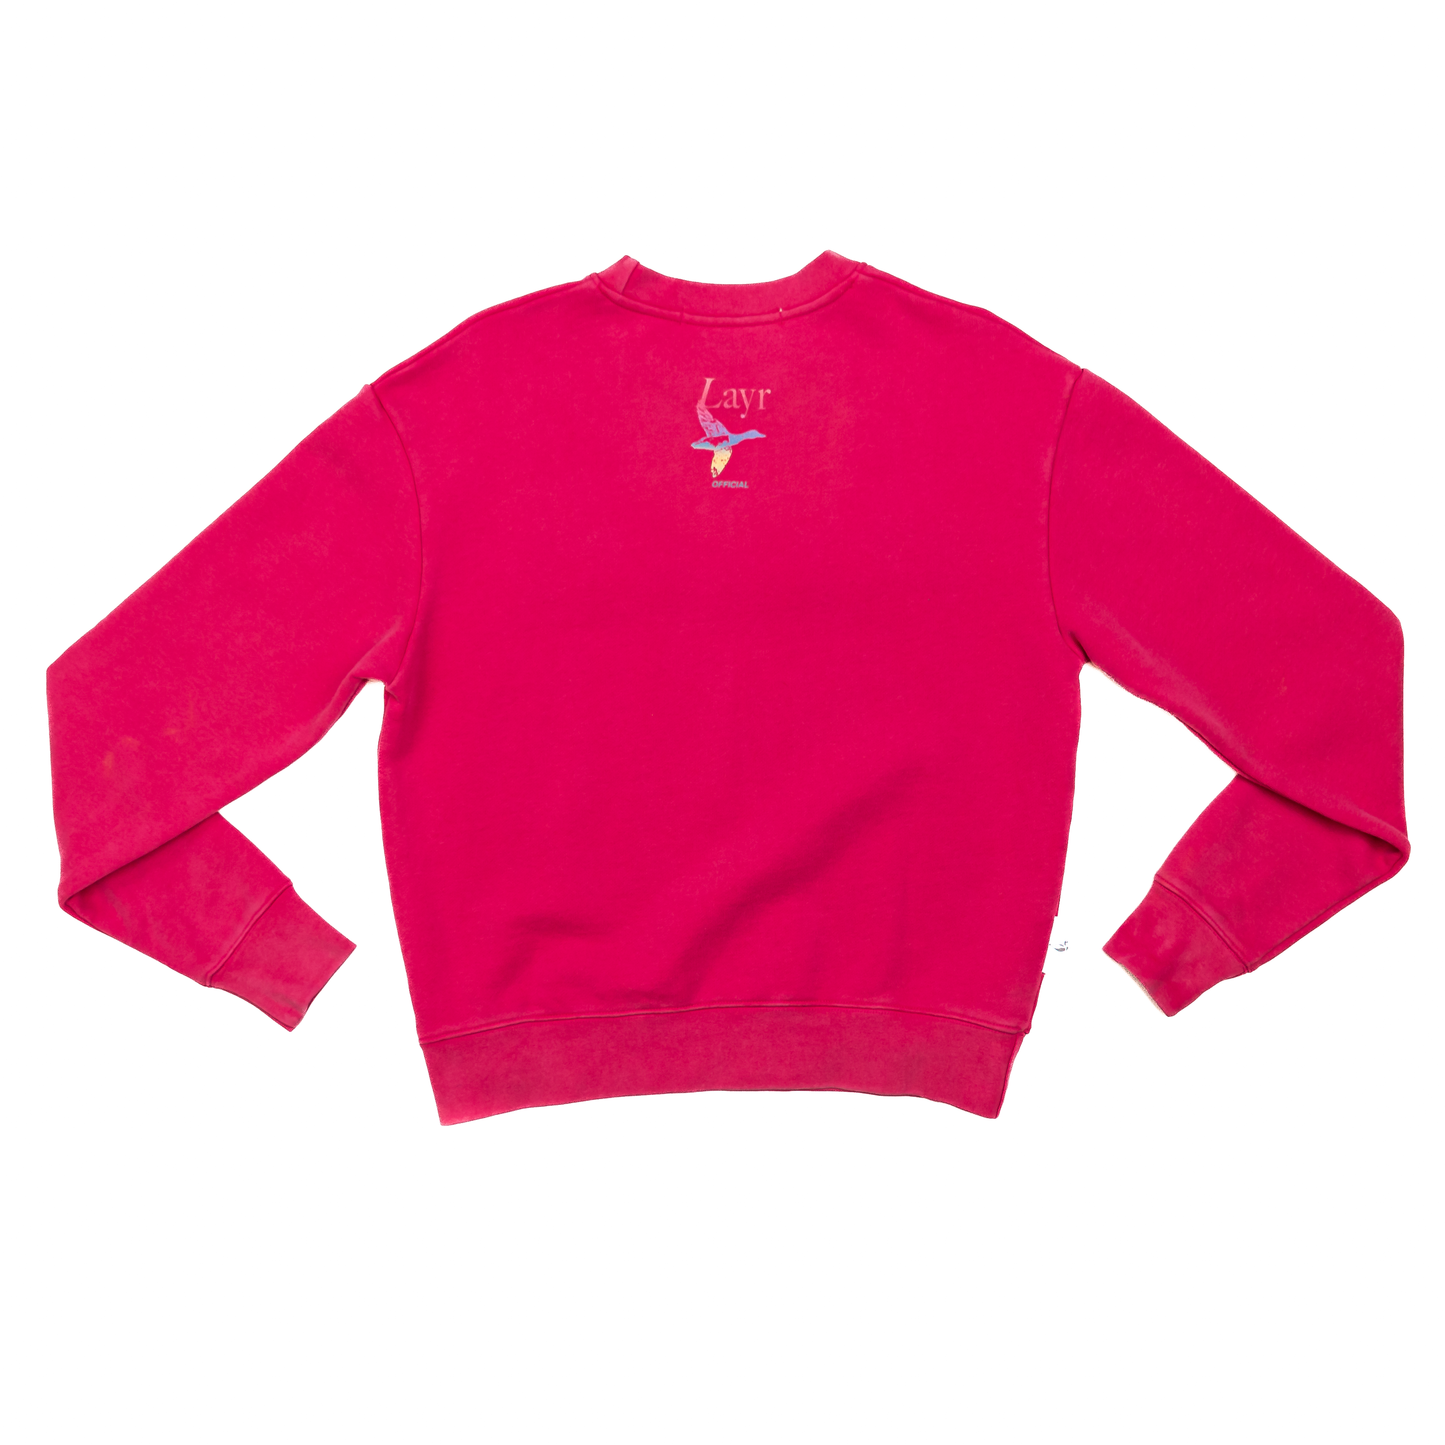 Never No More Luxury Crew, Washed Pink - Layr Official